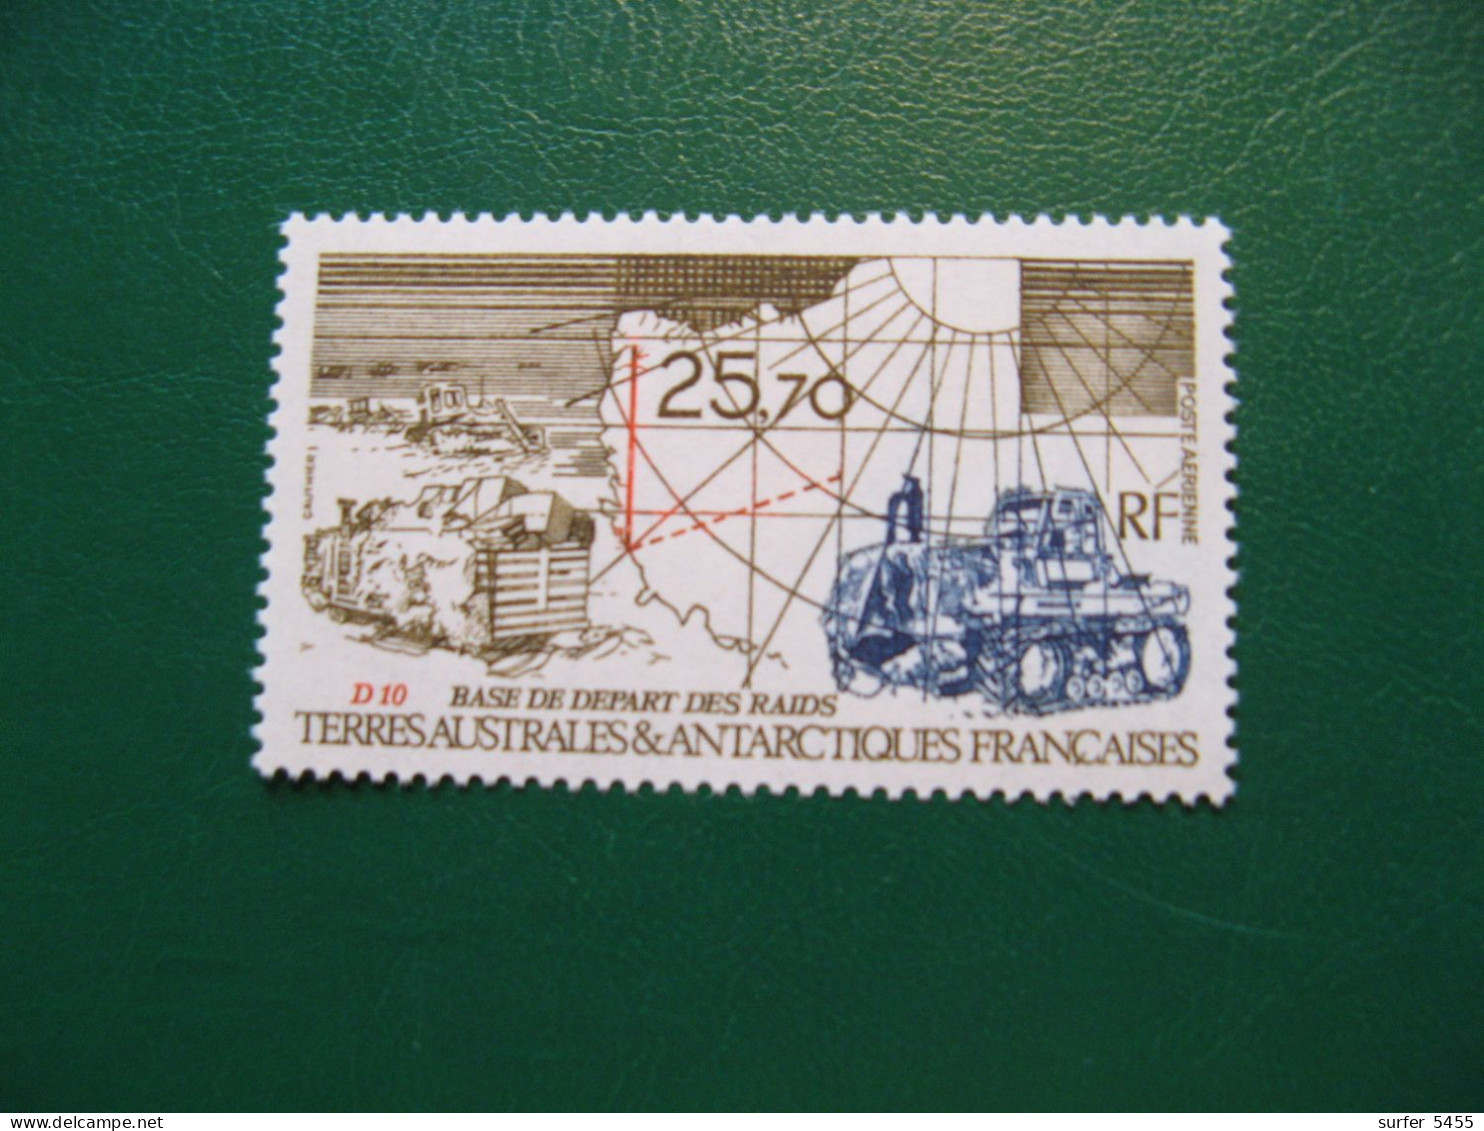 TAAF YVERT POSTE AERIENNE N° 127 - TIMBRE NEUF** LUXE - MNH - SERIE COMPLETE - FACIALE 3,91 EUROS - Nuevos